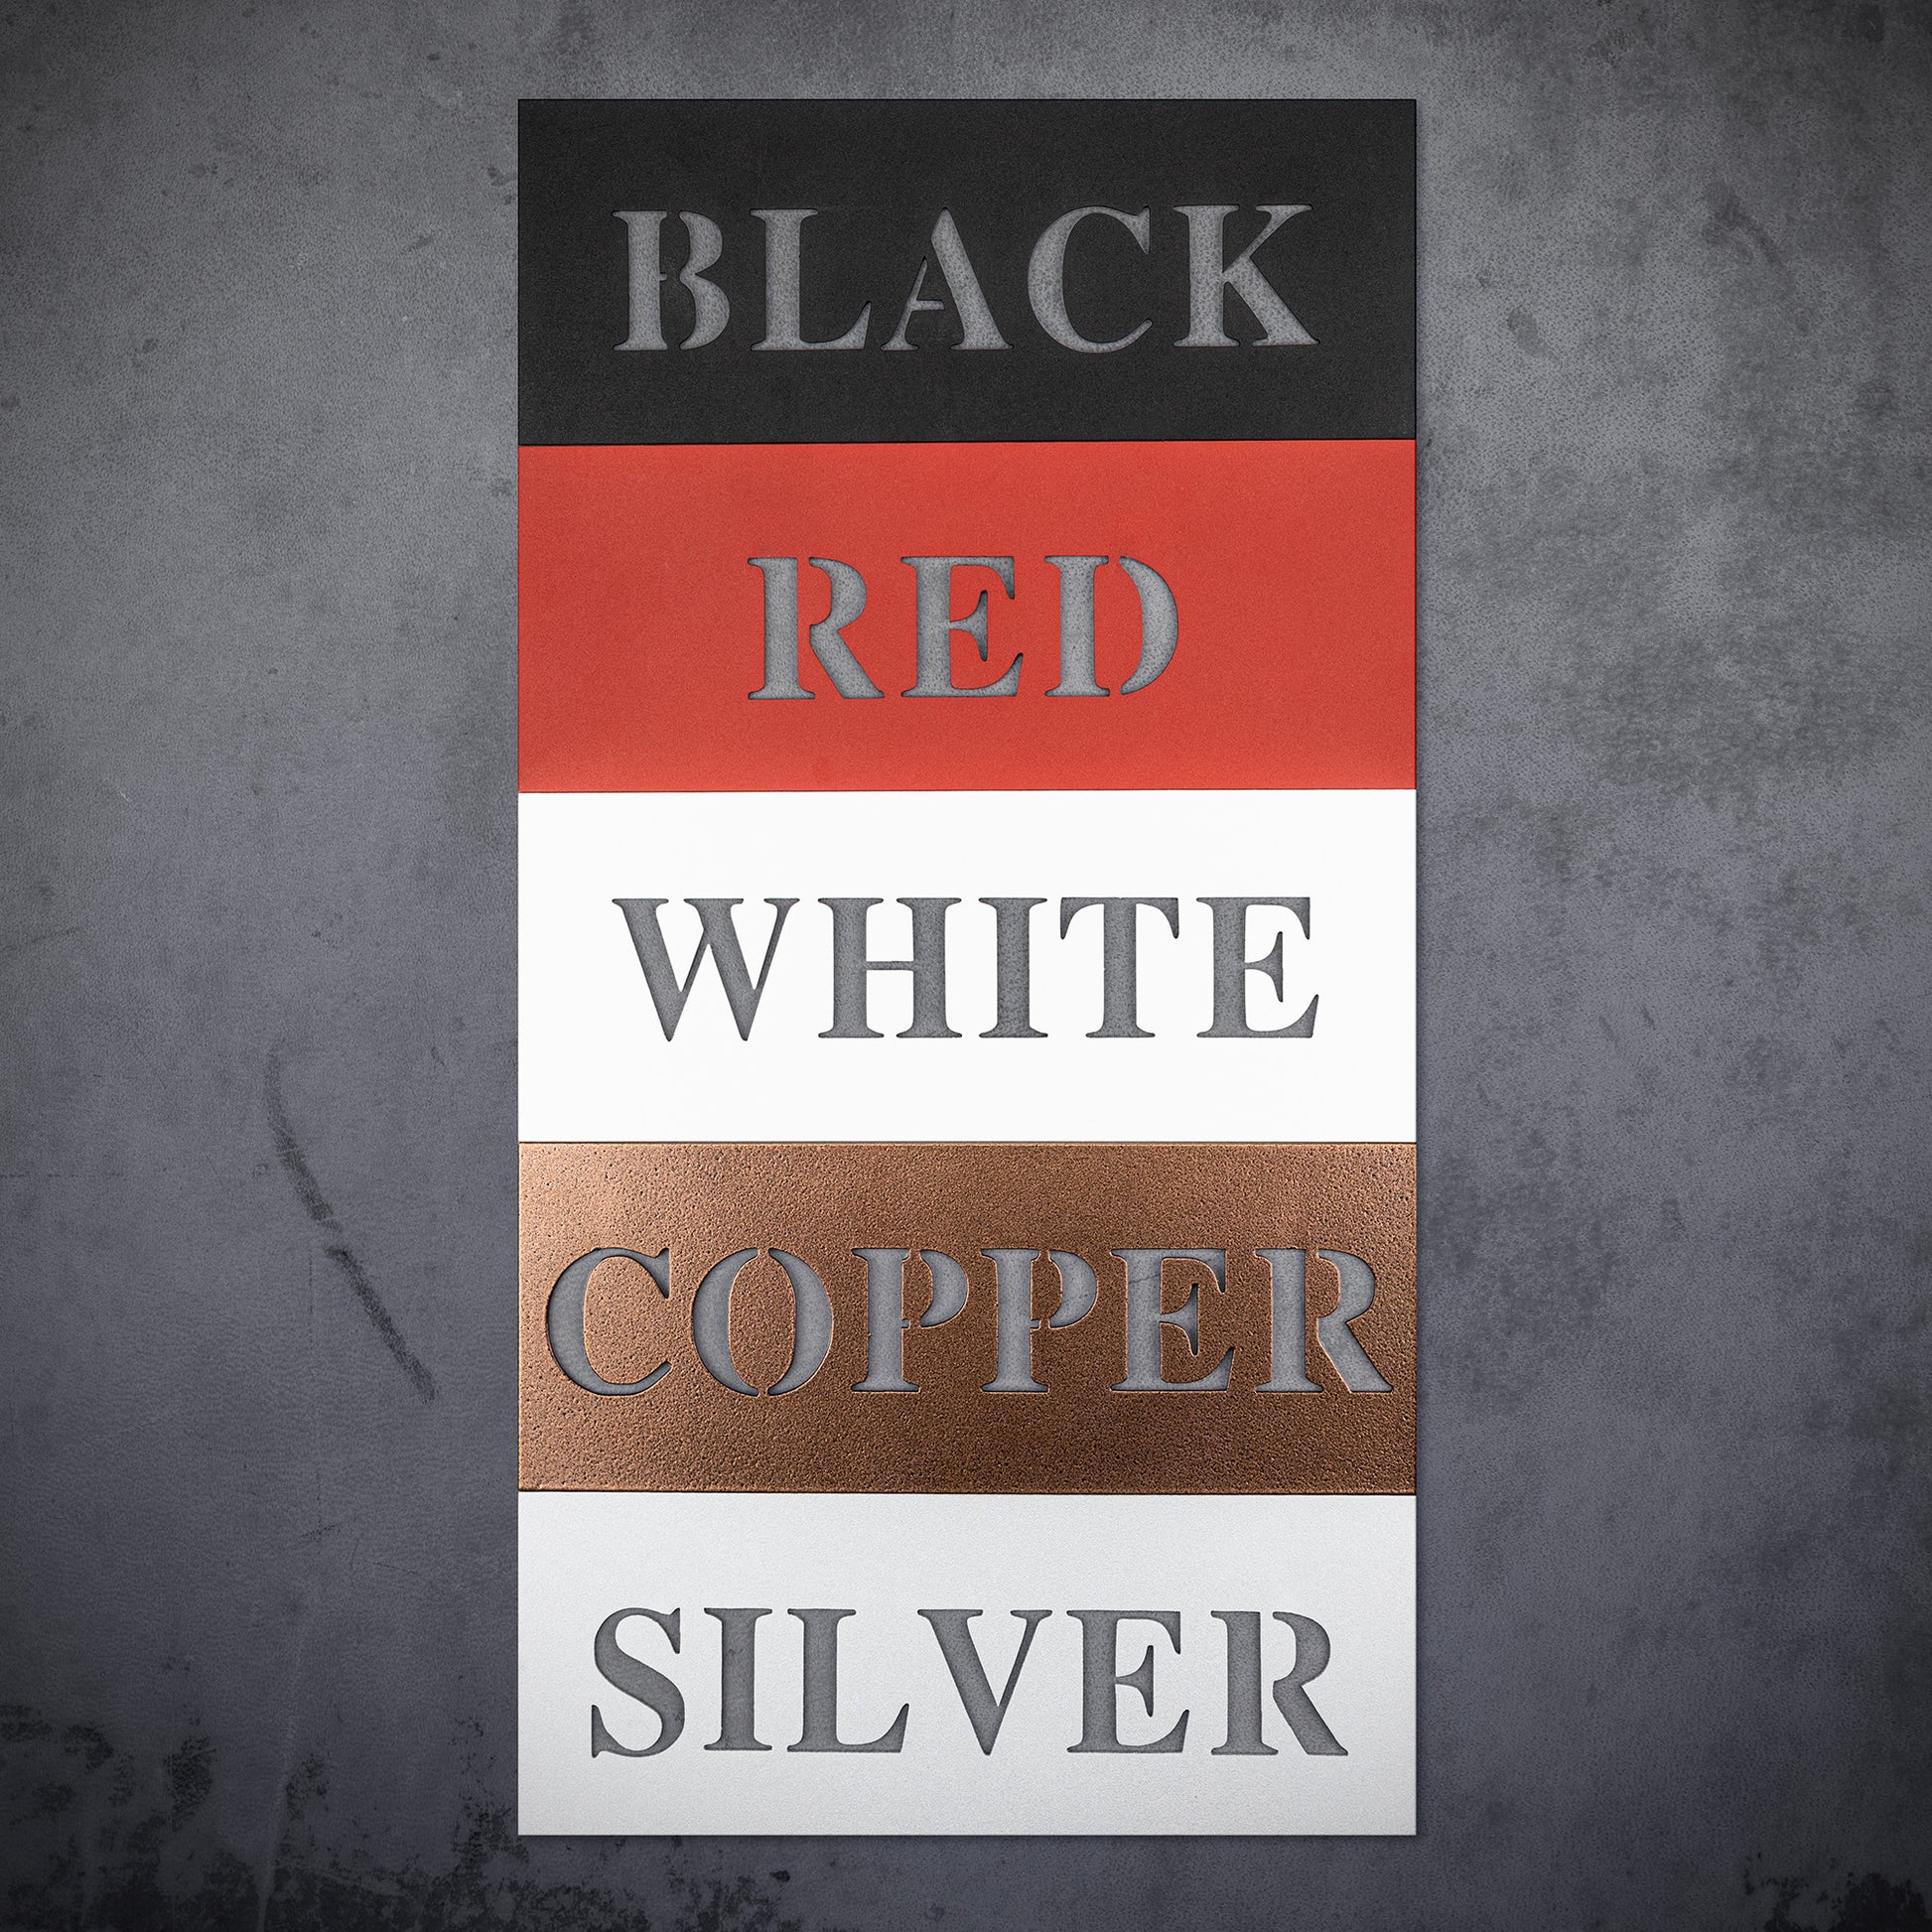 Five Acoustic Guitar with Sitting Guitarist Wall Sign Custom Name | Custom Metal Wall Art swatches labeled with their colors which are, from top to bottom, black, red, white, copper, and silver personalized name plates. Each has corresponding colored backgrounds and text.